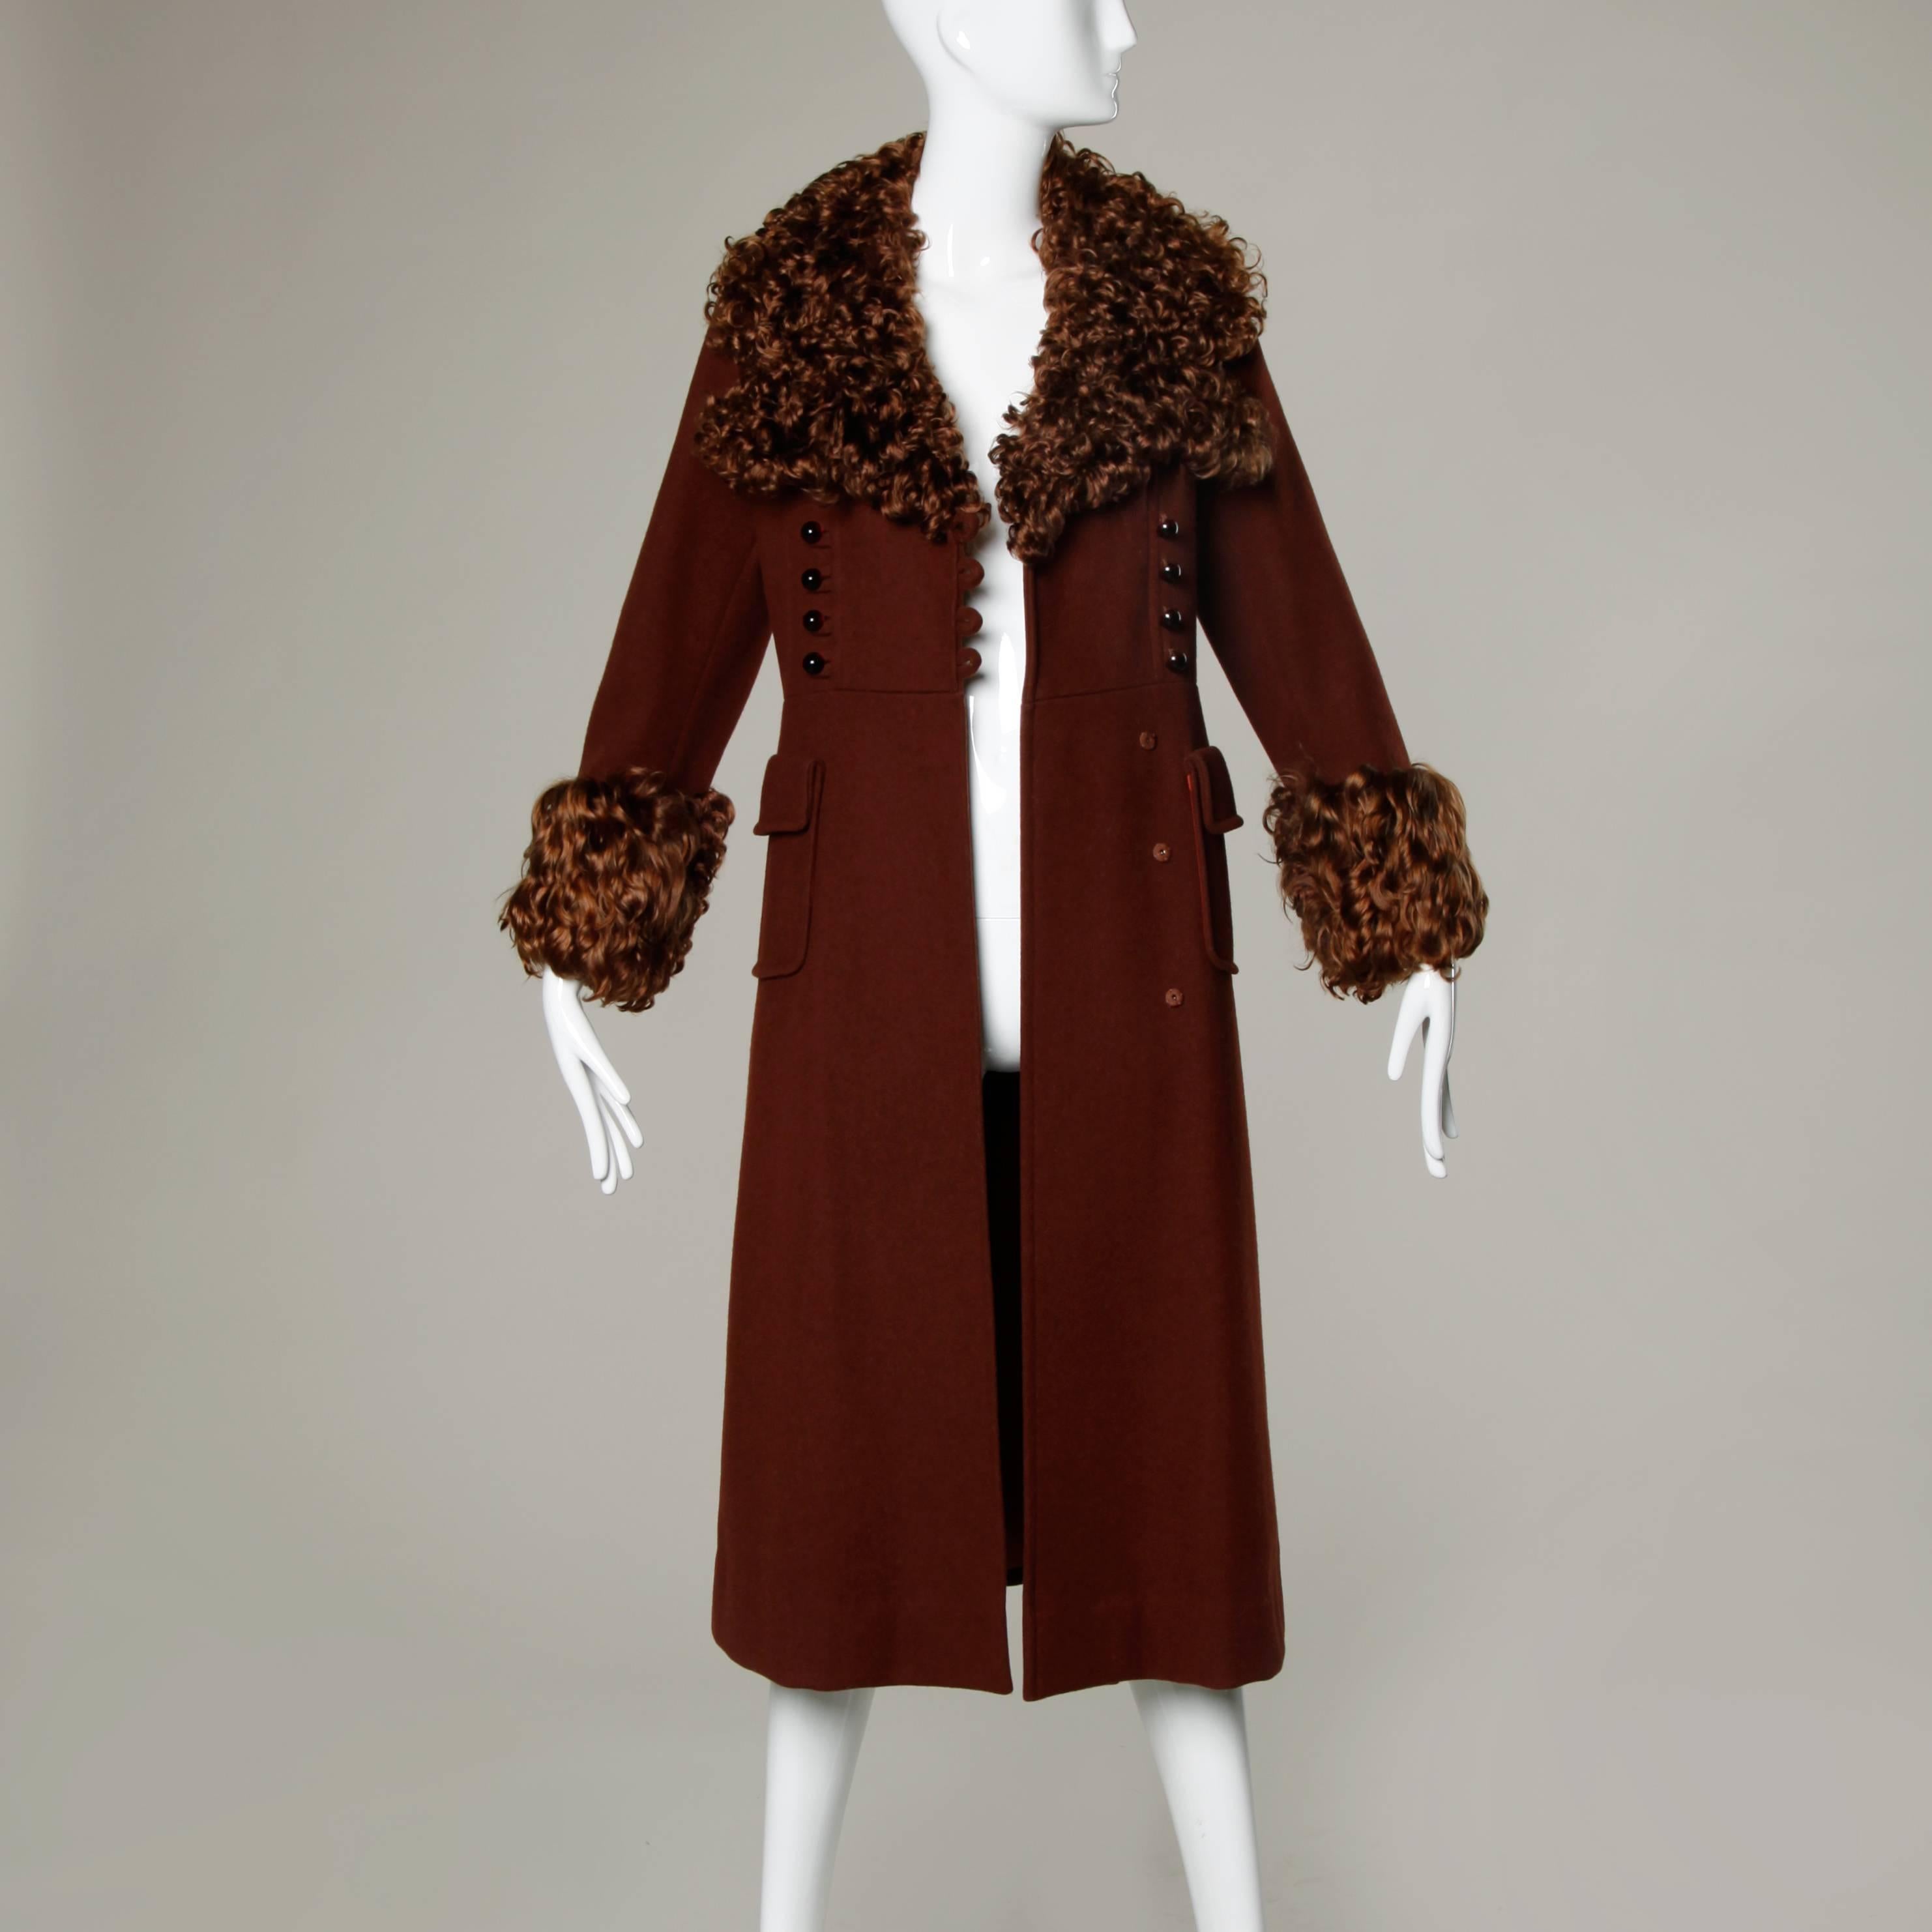 Vintage elegant wool princess coat with military-inspired bobble buttons and genuine Mongolian lamb fur cuffs and collar. 

Details:

Fully Lined
Front Pockets
Front Button and Snap Closure
Marked Size: Not Marked
Estimated Size: